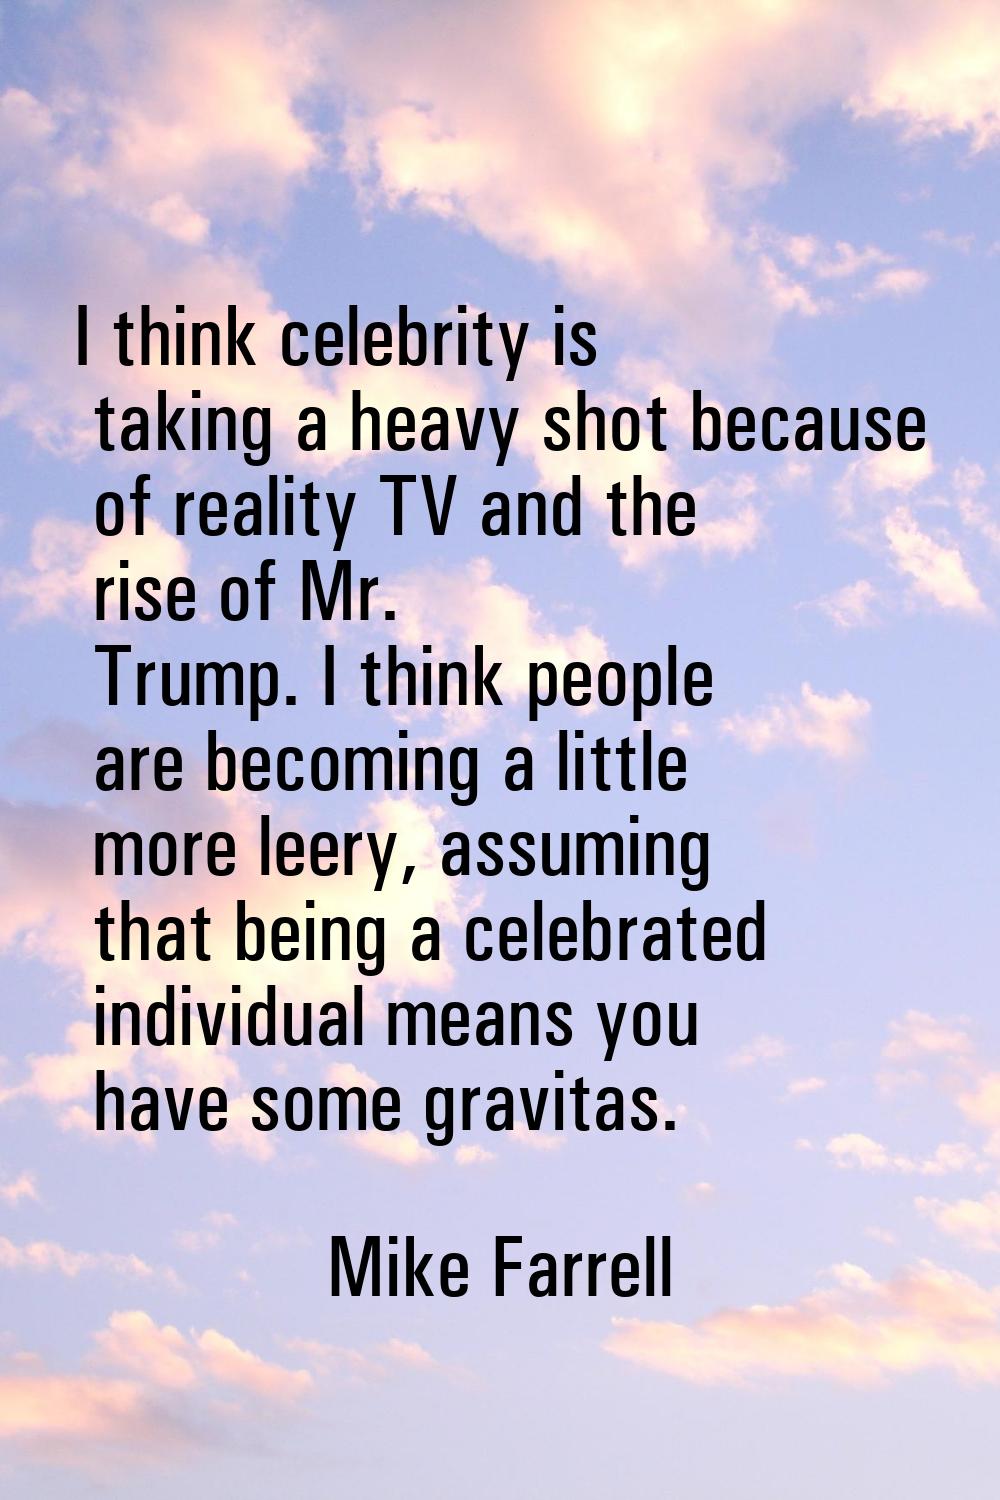 I think celebrity is taking a heavy shot because of reality TV and the rise of Mr. Trump. I think p